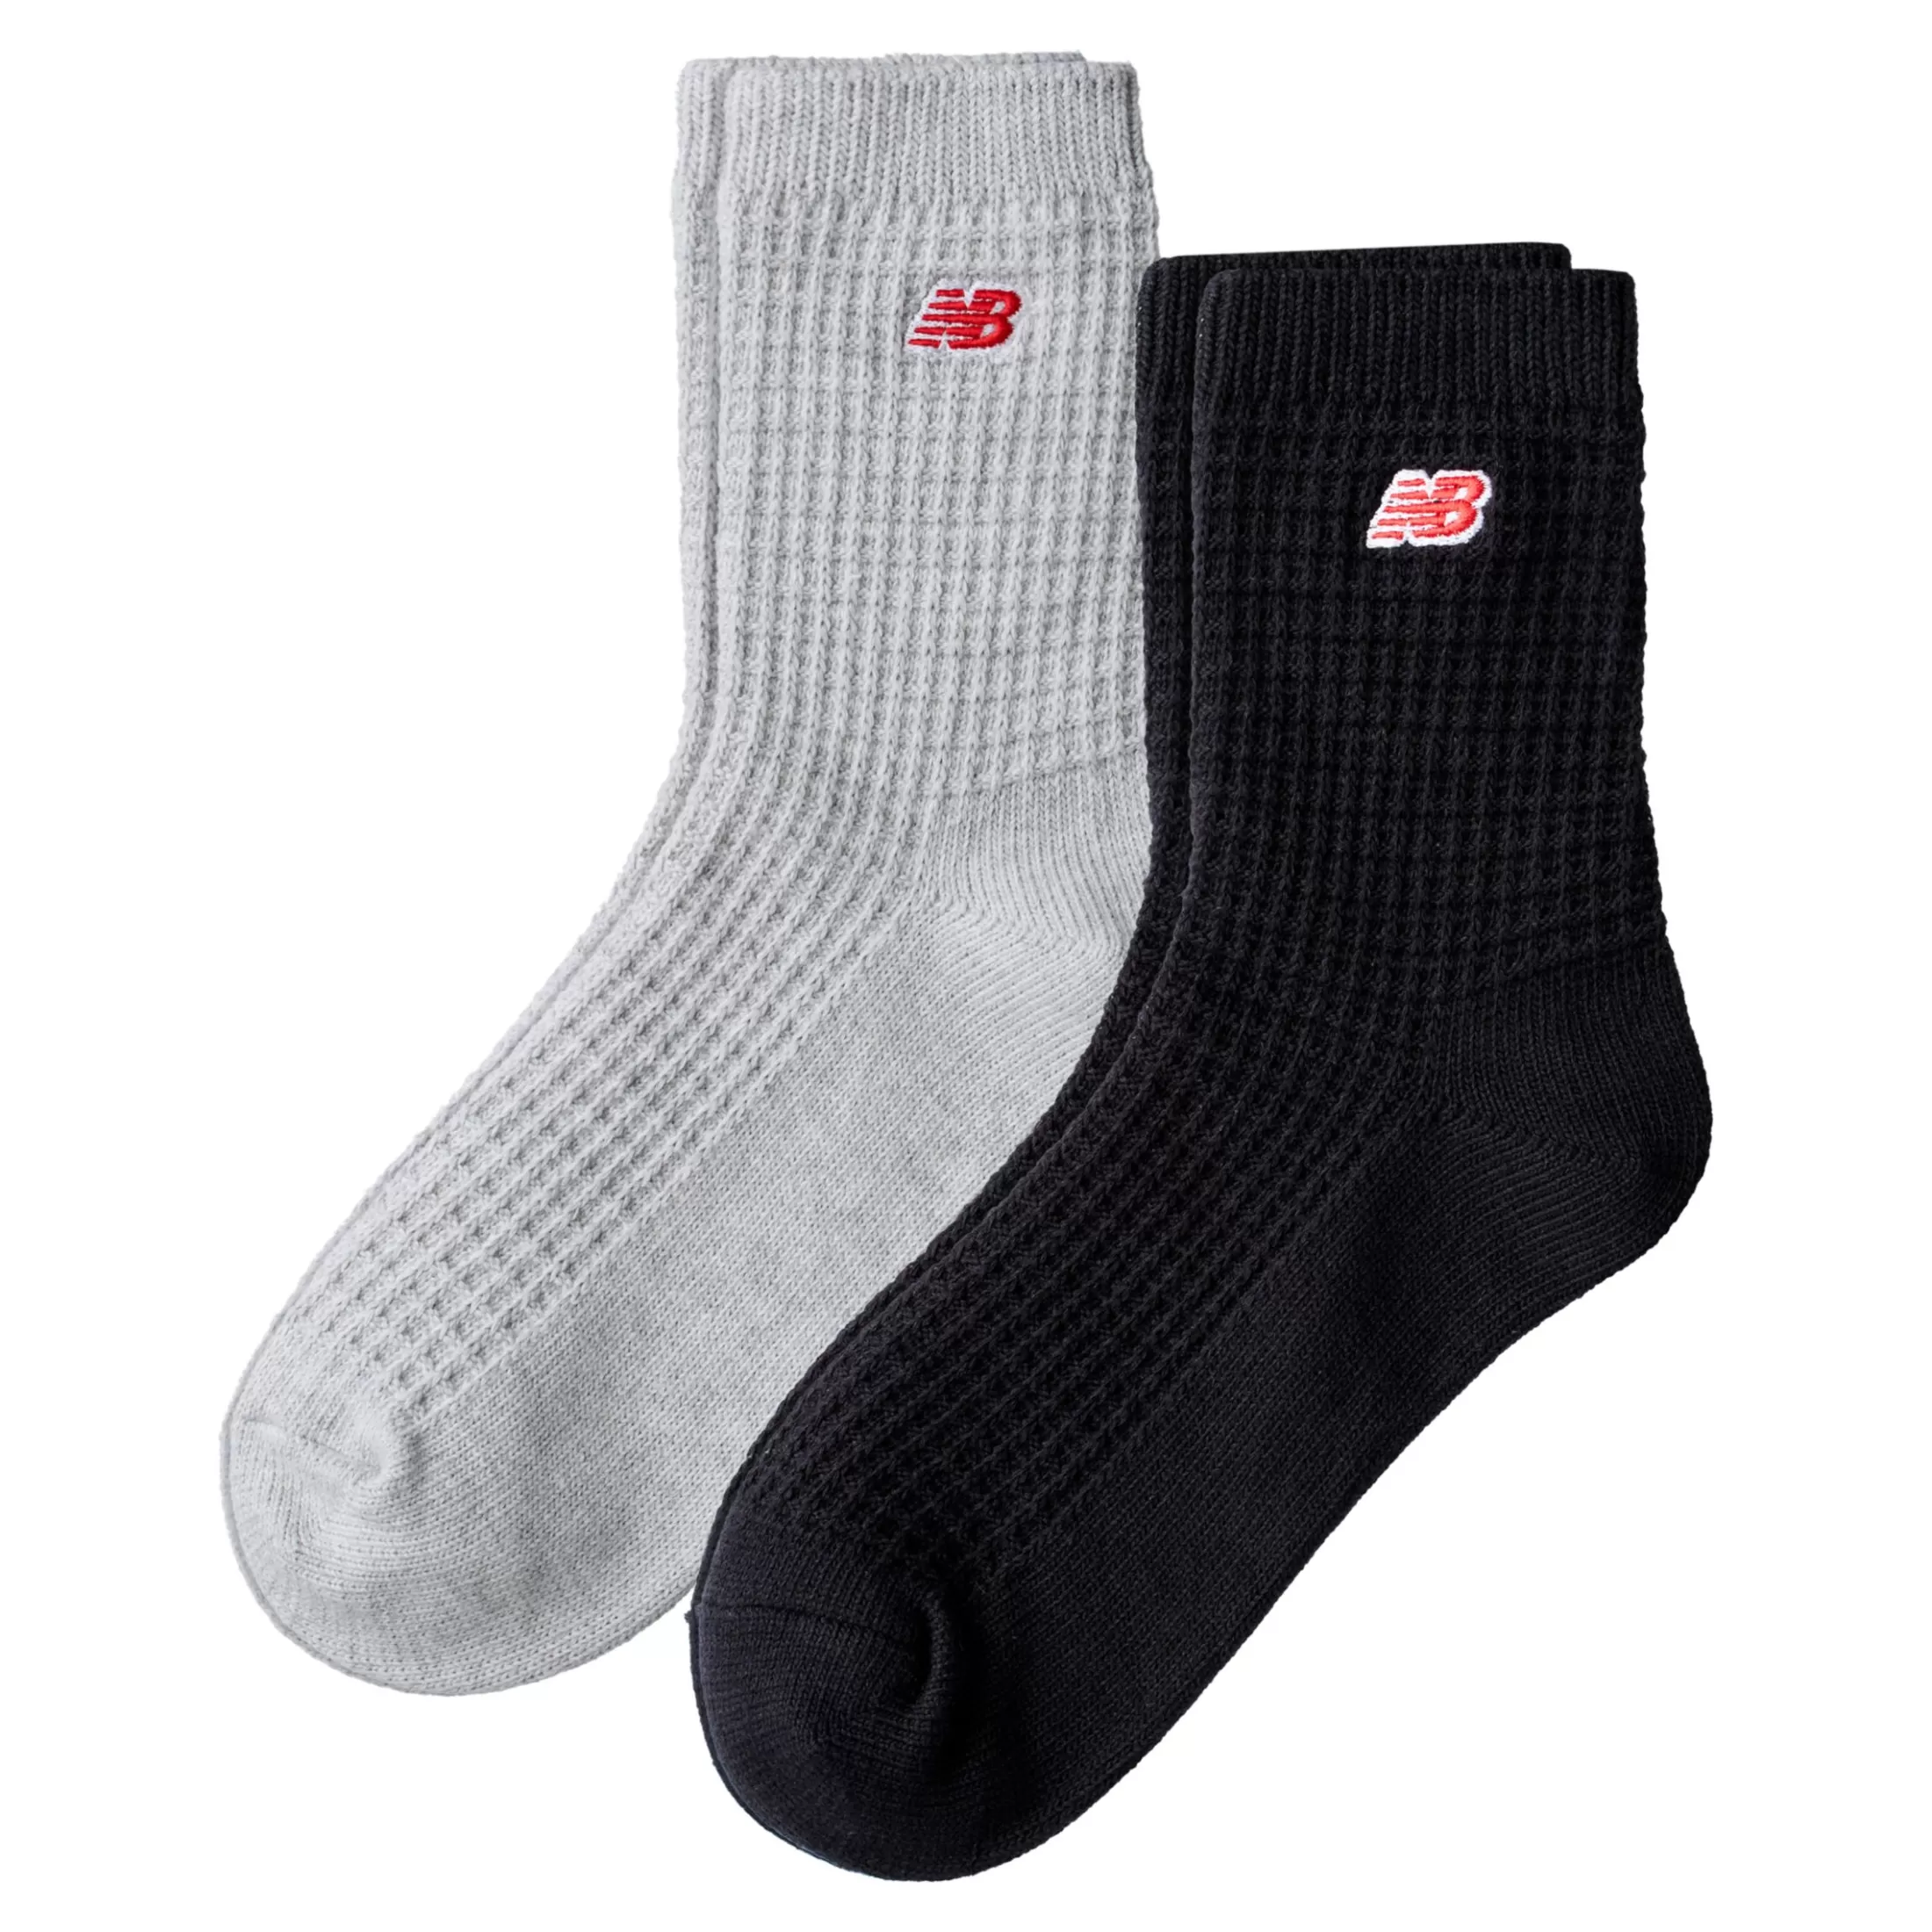 Clearance Unisex Waffle Knit Ankle Socks 2 Pack MULHER/HOMEN Socks | All Accessories